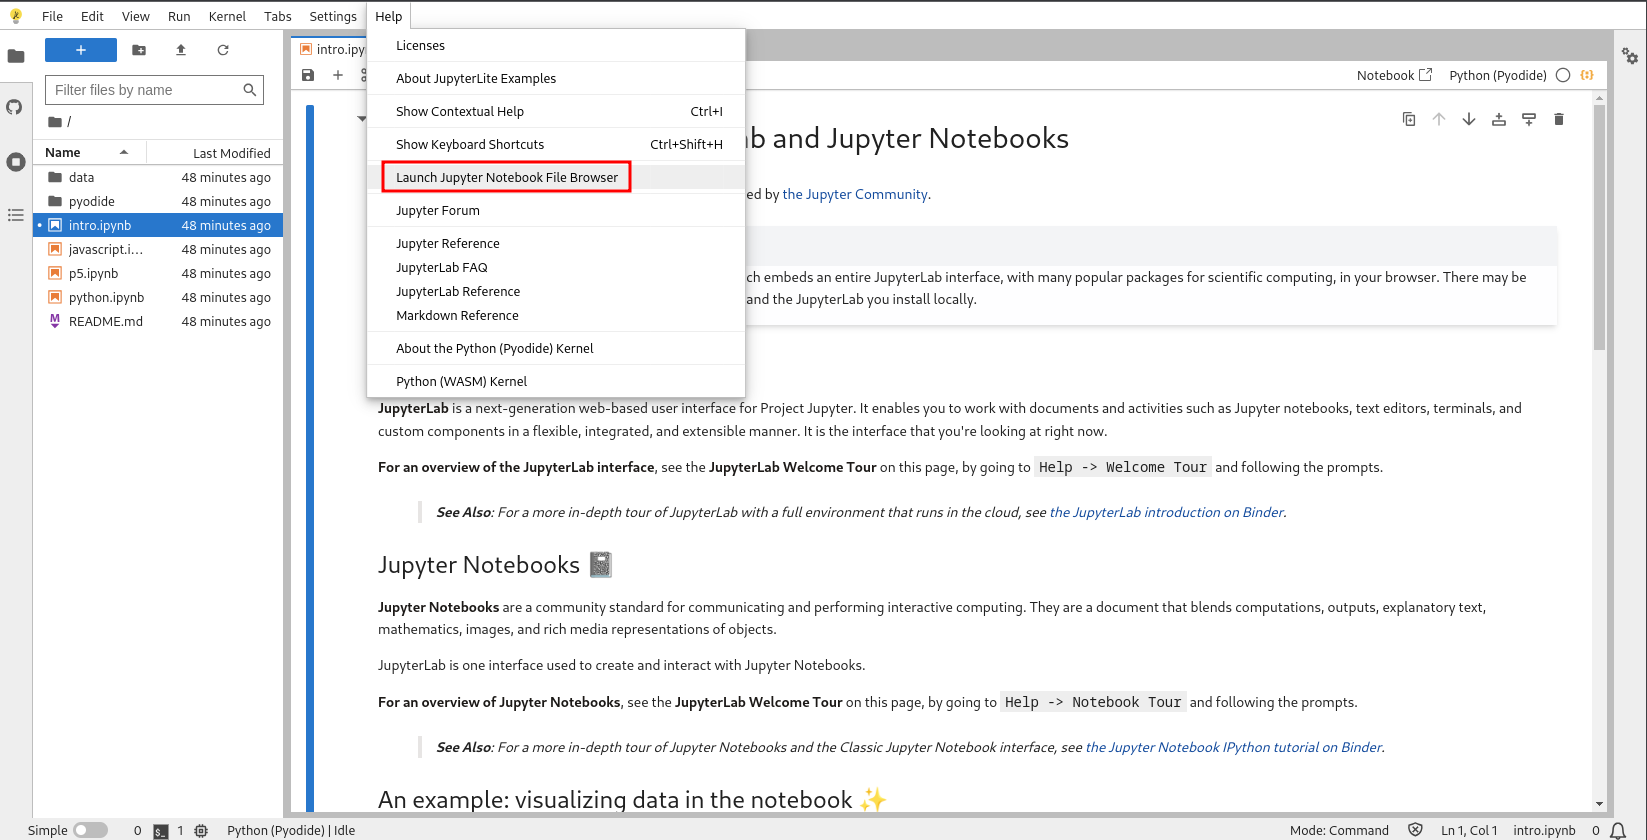 a screenshot showing how to launch Jupyter Notebook from the menu entry